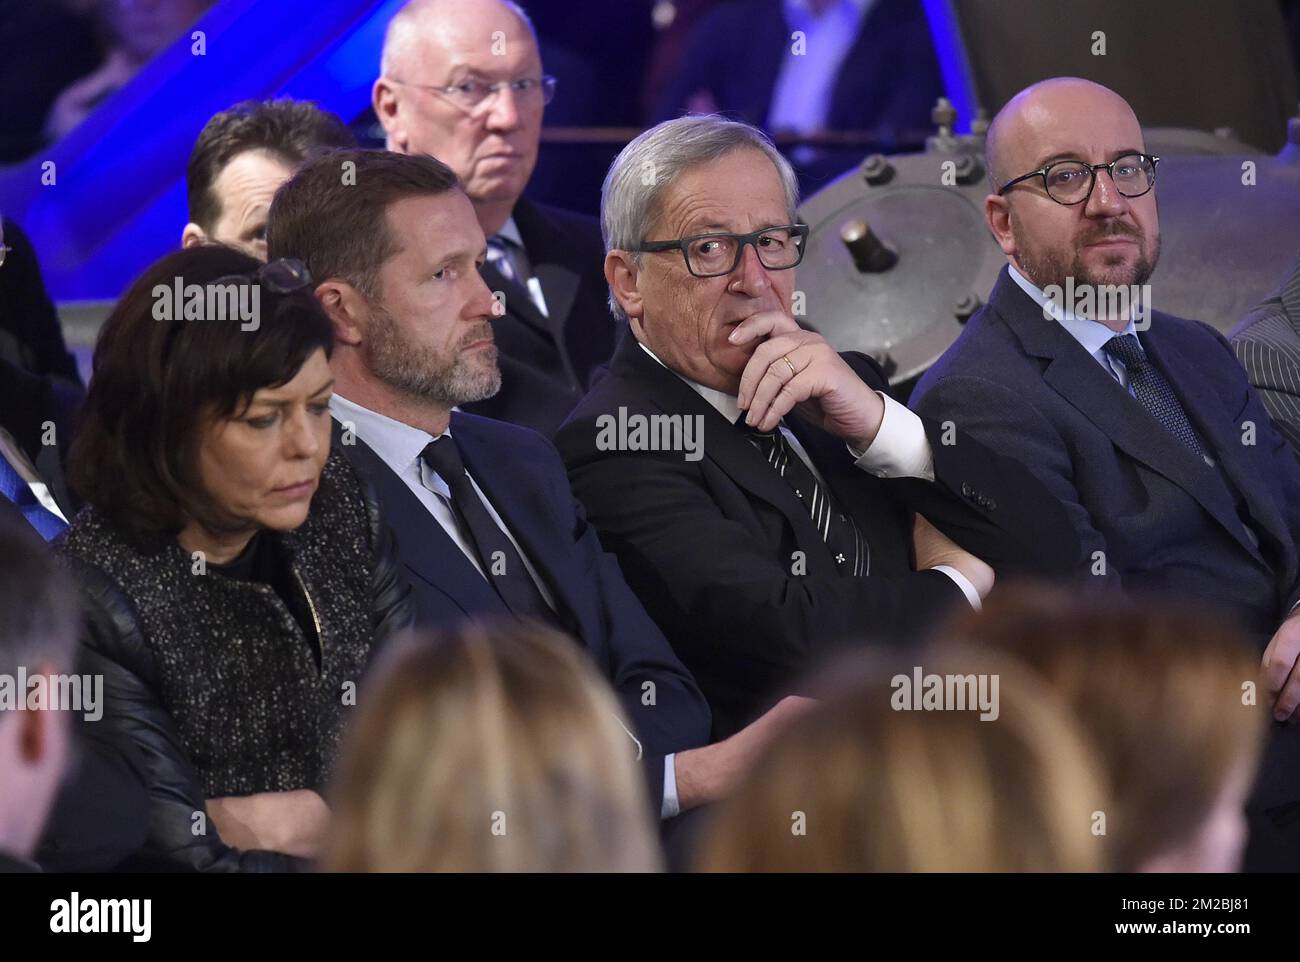 cdH's Joelle Milquet, Charleroi's mayor Paul Magnette, European Commission President Jean-Claude Juncker and Belgian Prime Minister Charles Michel attend a tribute ceremony for cdH politician Philippe Maystadt at the Bois du Casier in Marcinelle, Monday 11 December 2017. BELGA PHOTO JOHN THYS Stock Photo